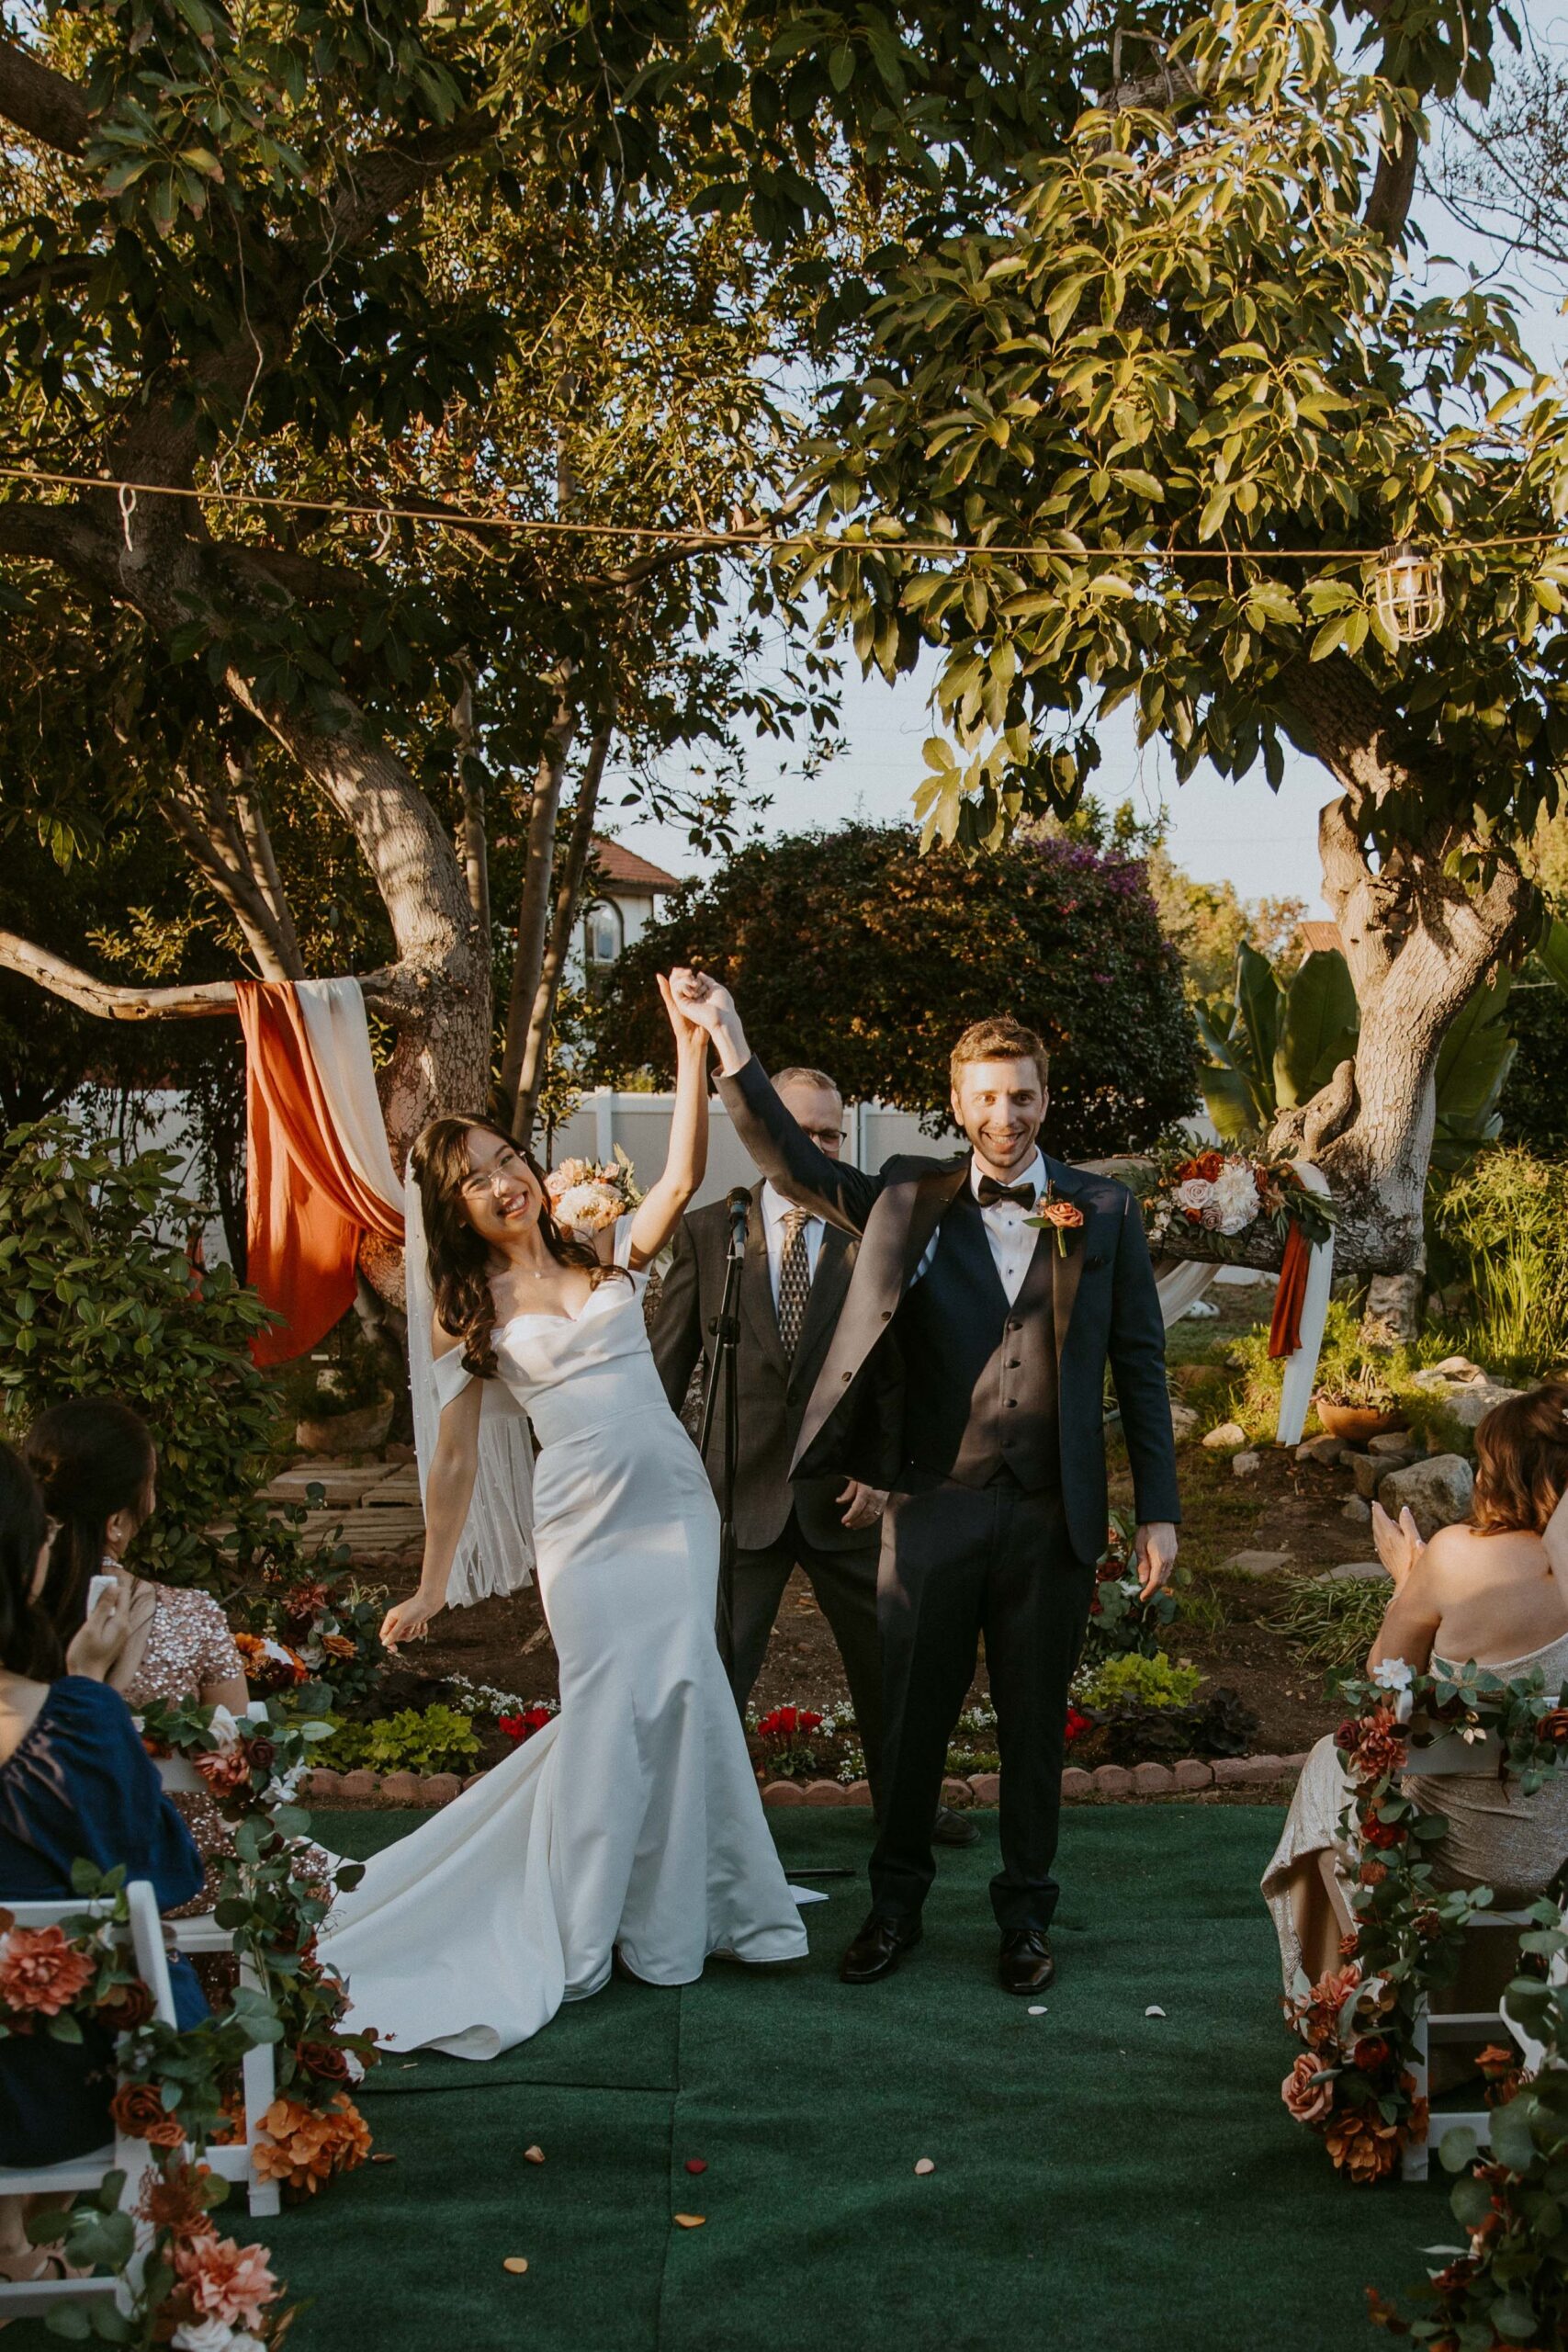 A newlywed couple walking down the aisle with their hands raised in celebration, surrounded by seated guests at their intimate backyard wedding. 